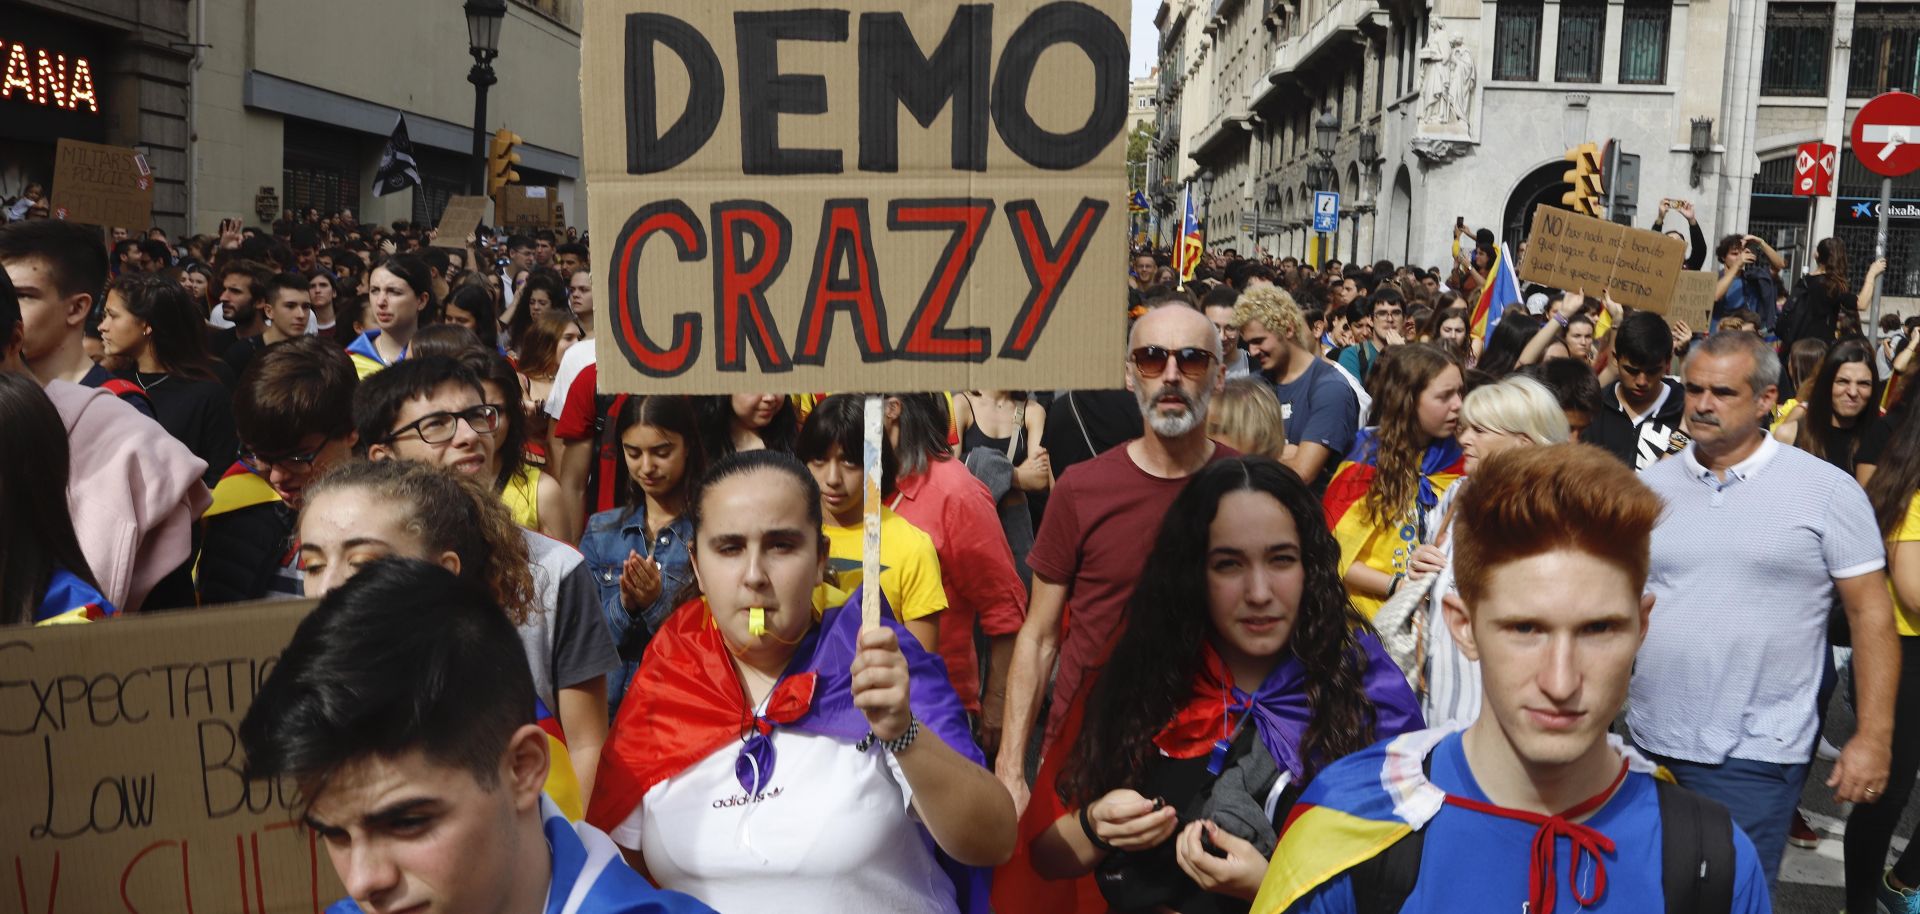 Protesters in the streets of the Spanish city of Barcelona on Oct. 18, 2019, demonstrate against the recent sentencing of separatist politicians.